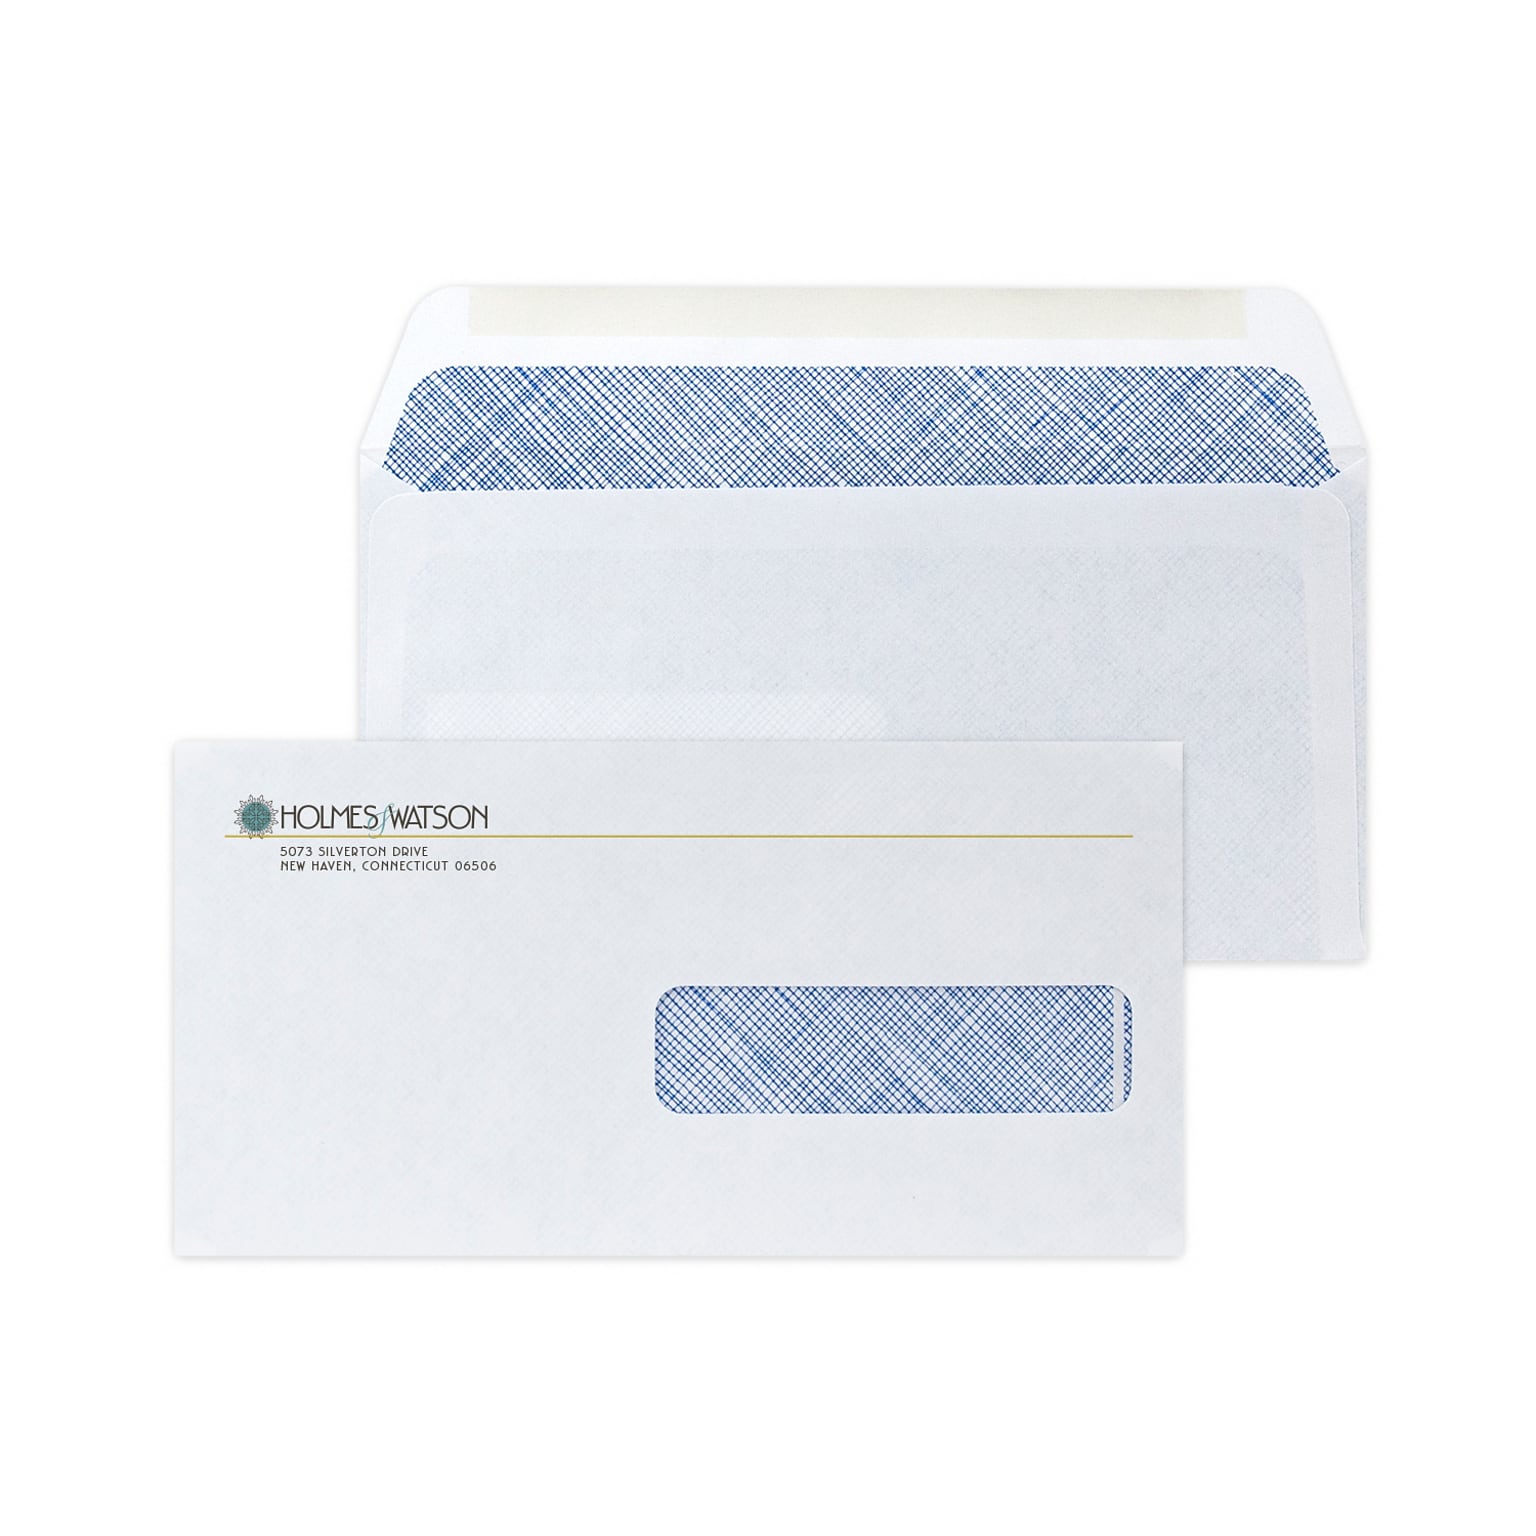 Custom Full Color 4-1/2 x 9 Insurance Claim Right Window Standard Envelopes with Security Tint, 24# White Wove, 250 / Pack